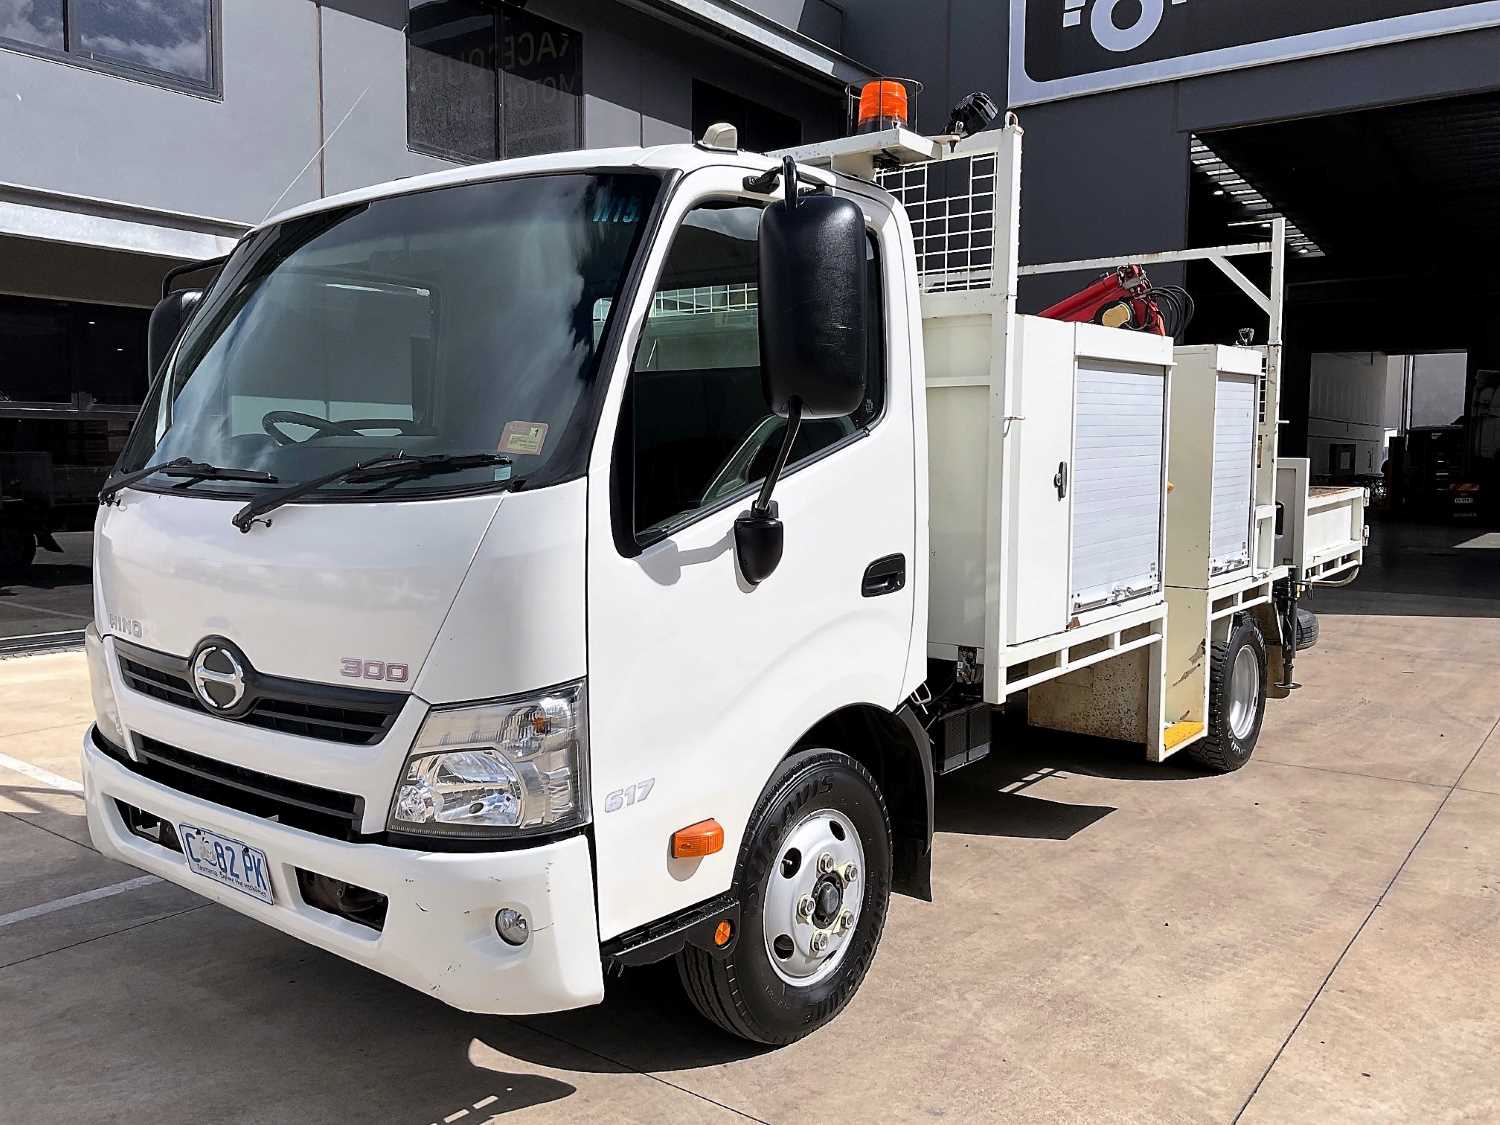 2012 HINO 300 SERVICE BODY WITH TIPPER